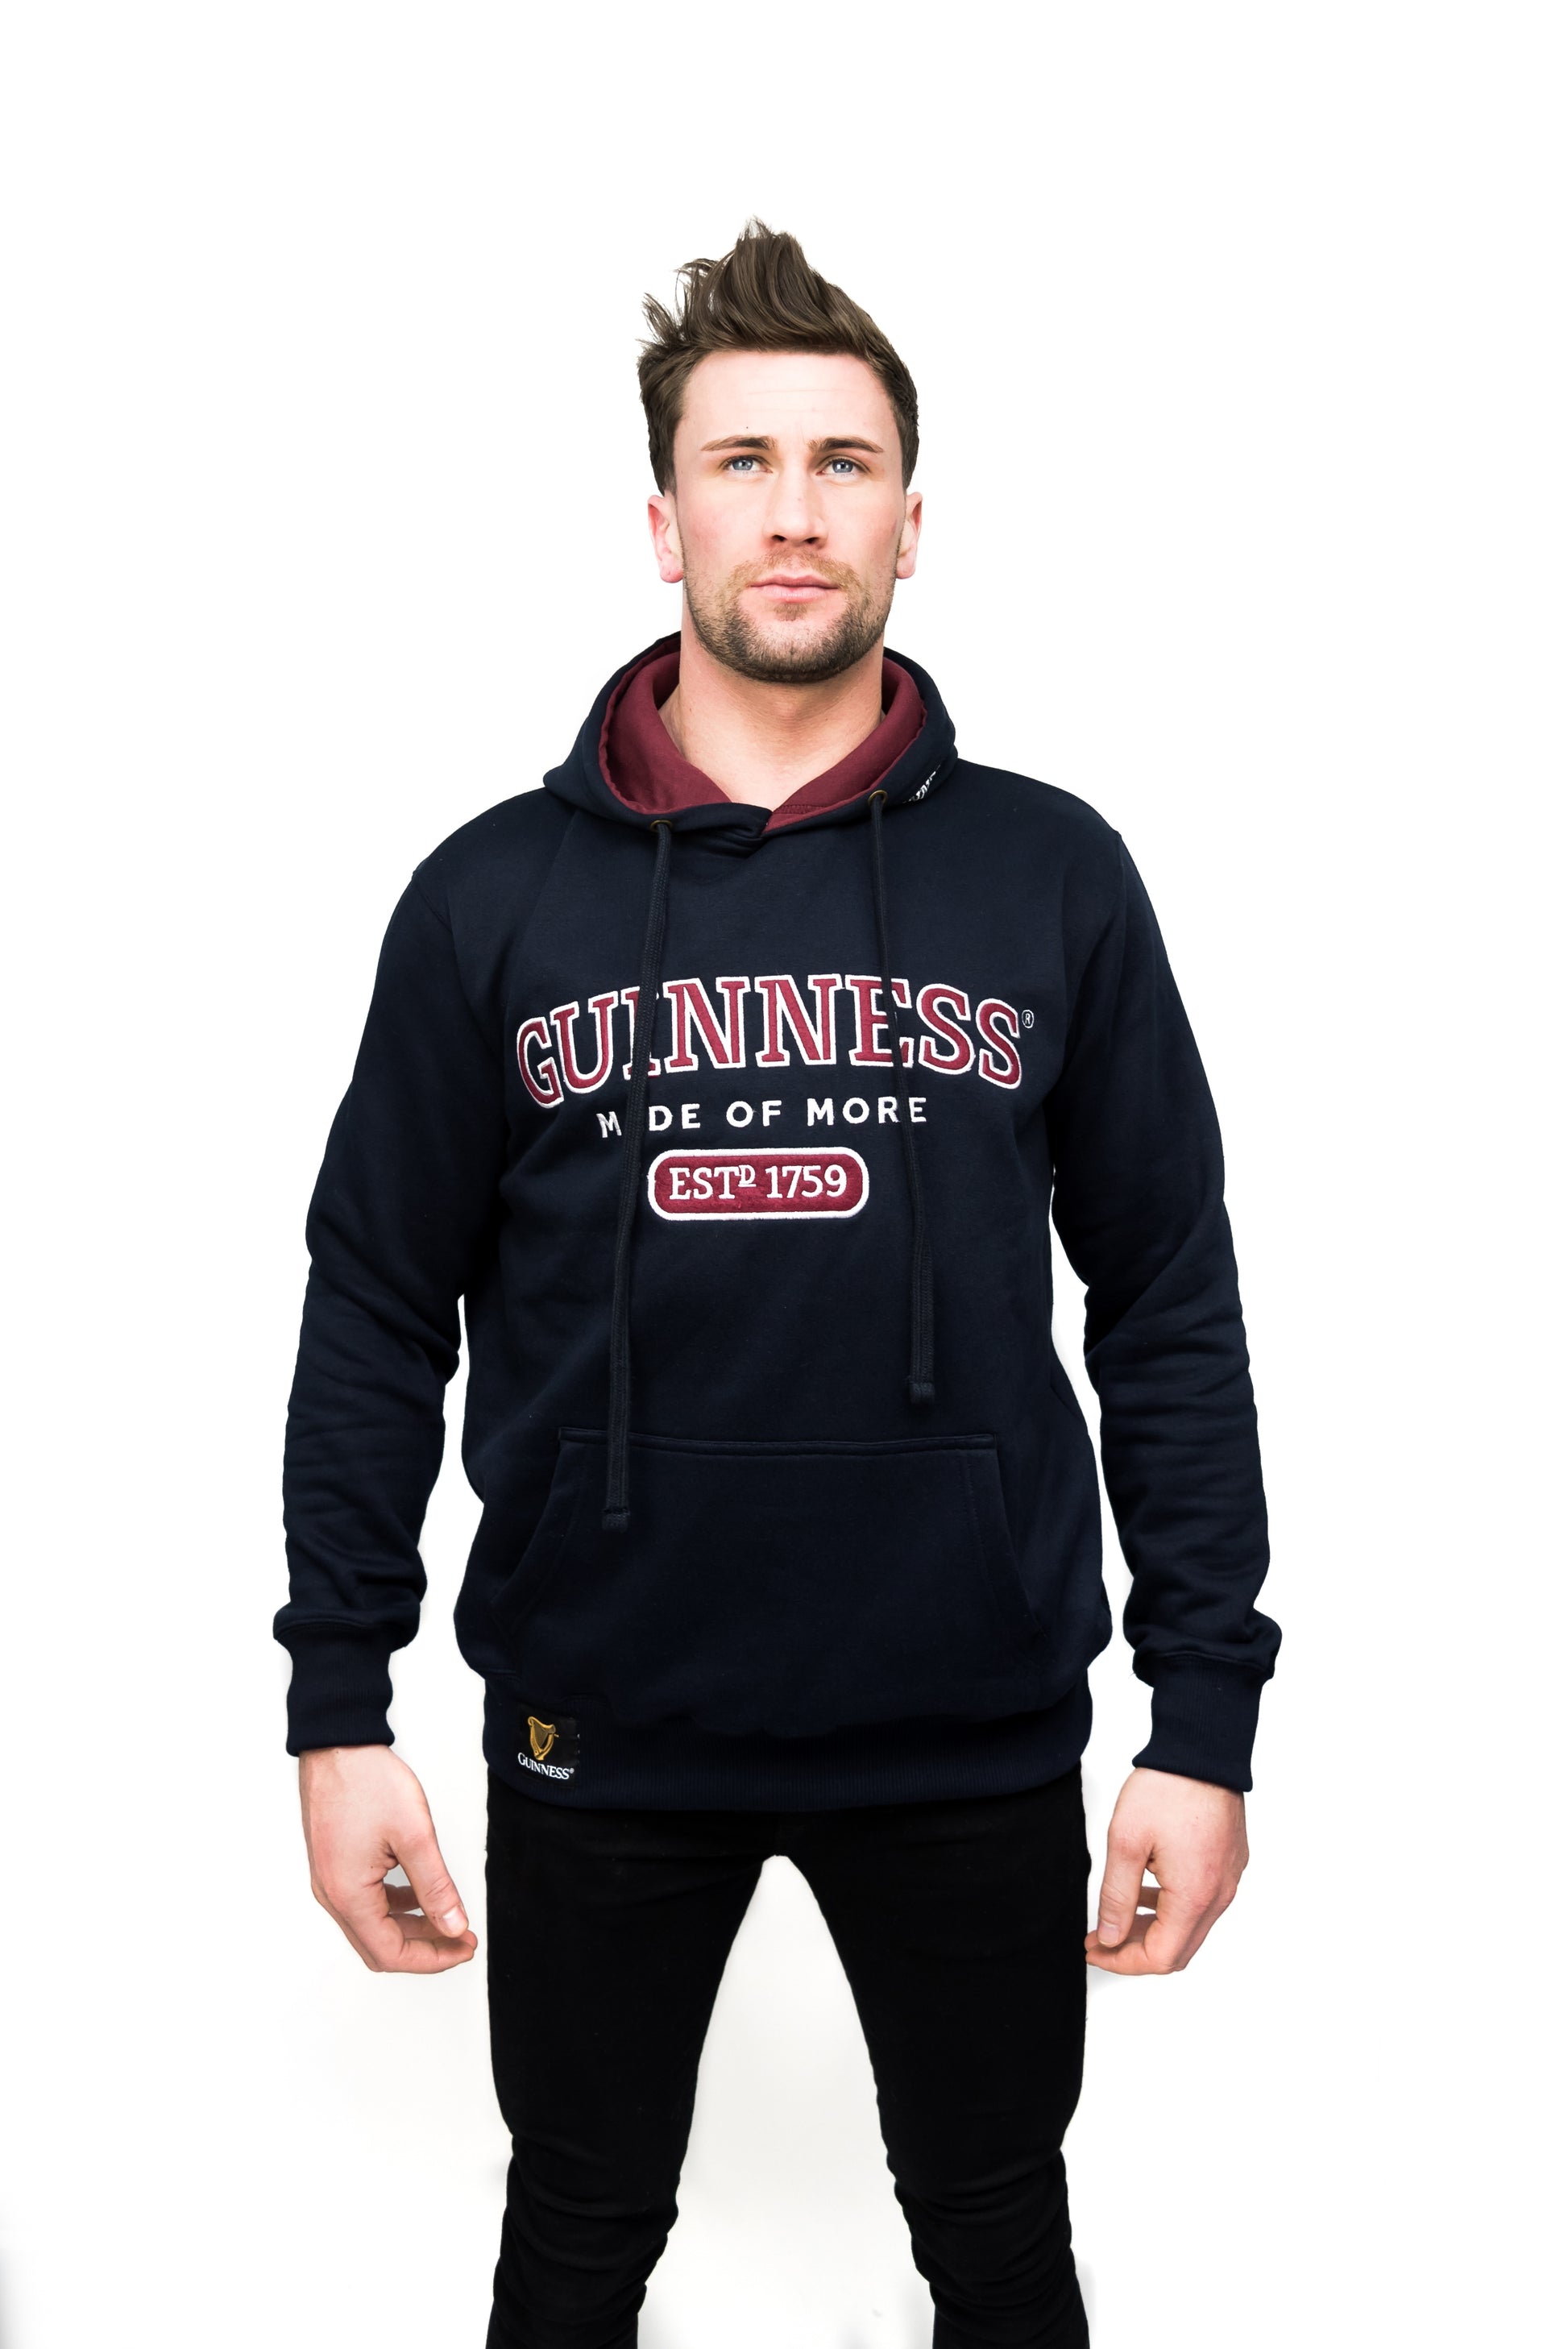 A man wearing a Guinness Signature Navy Hooded Sweatshirt with the Guinness UK logo on it.